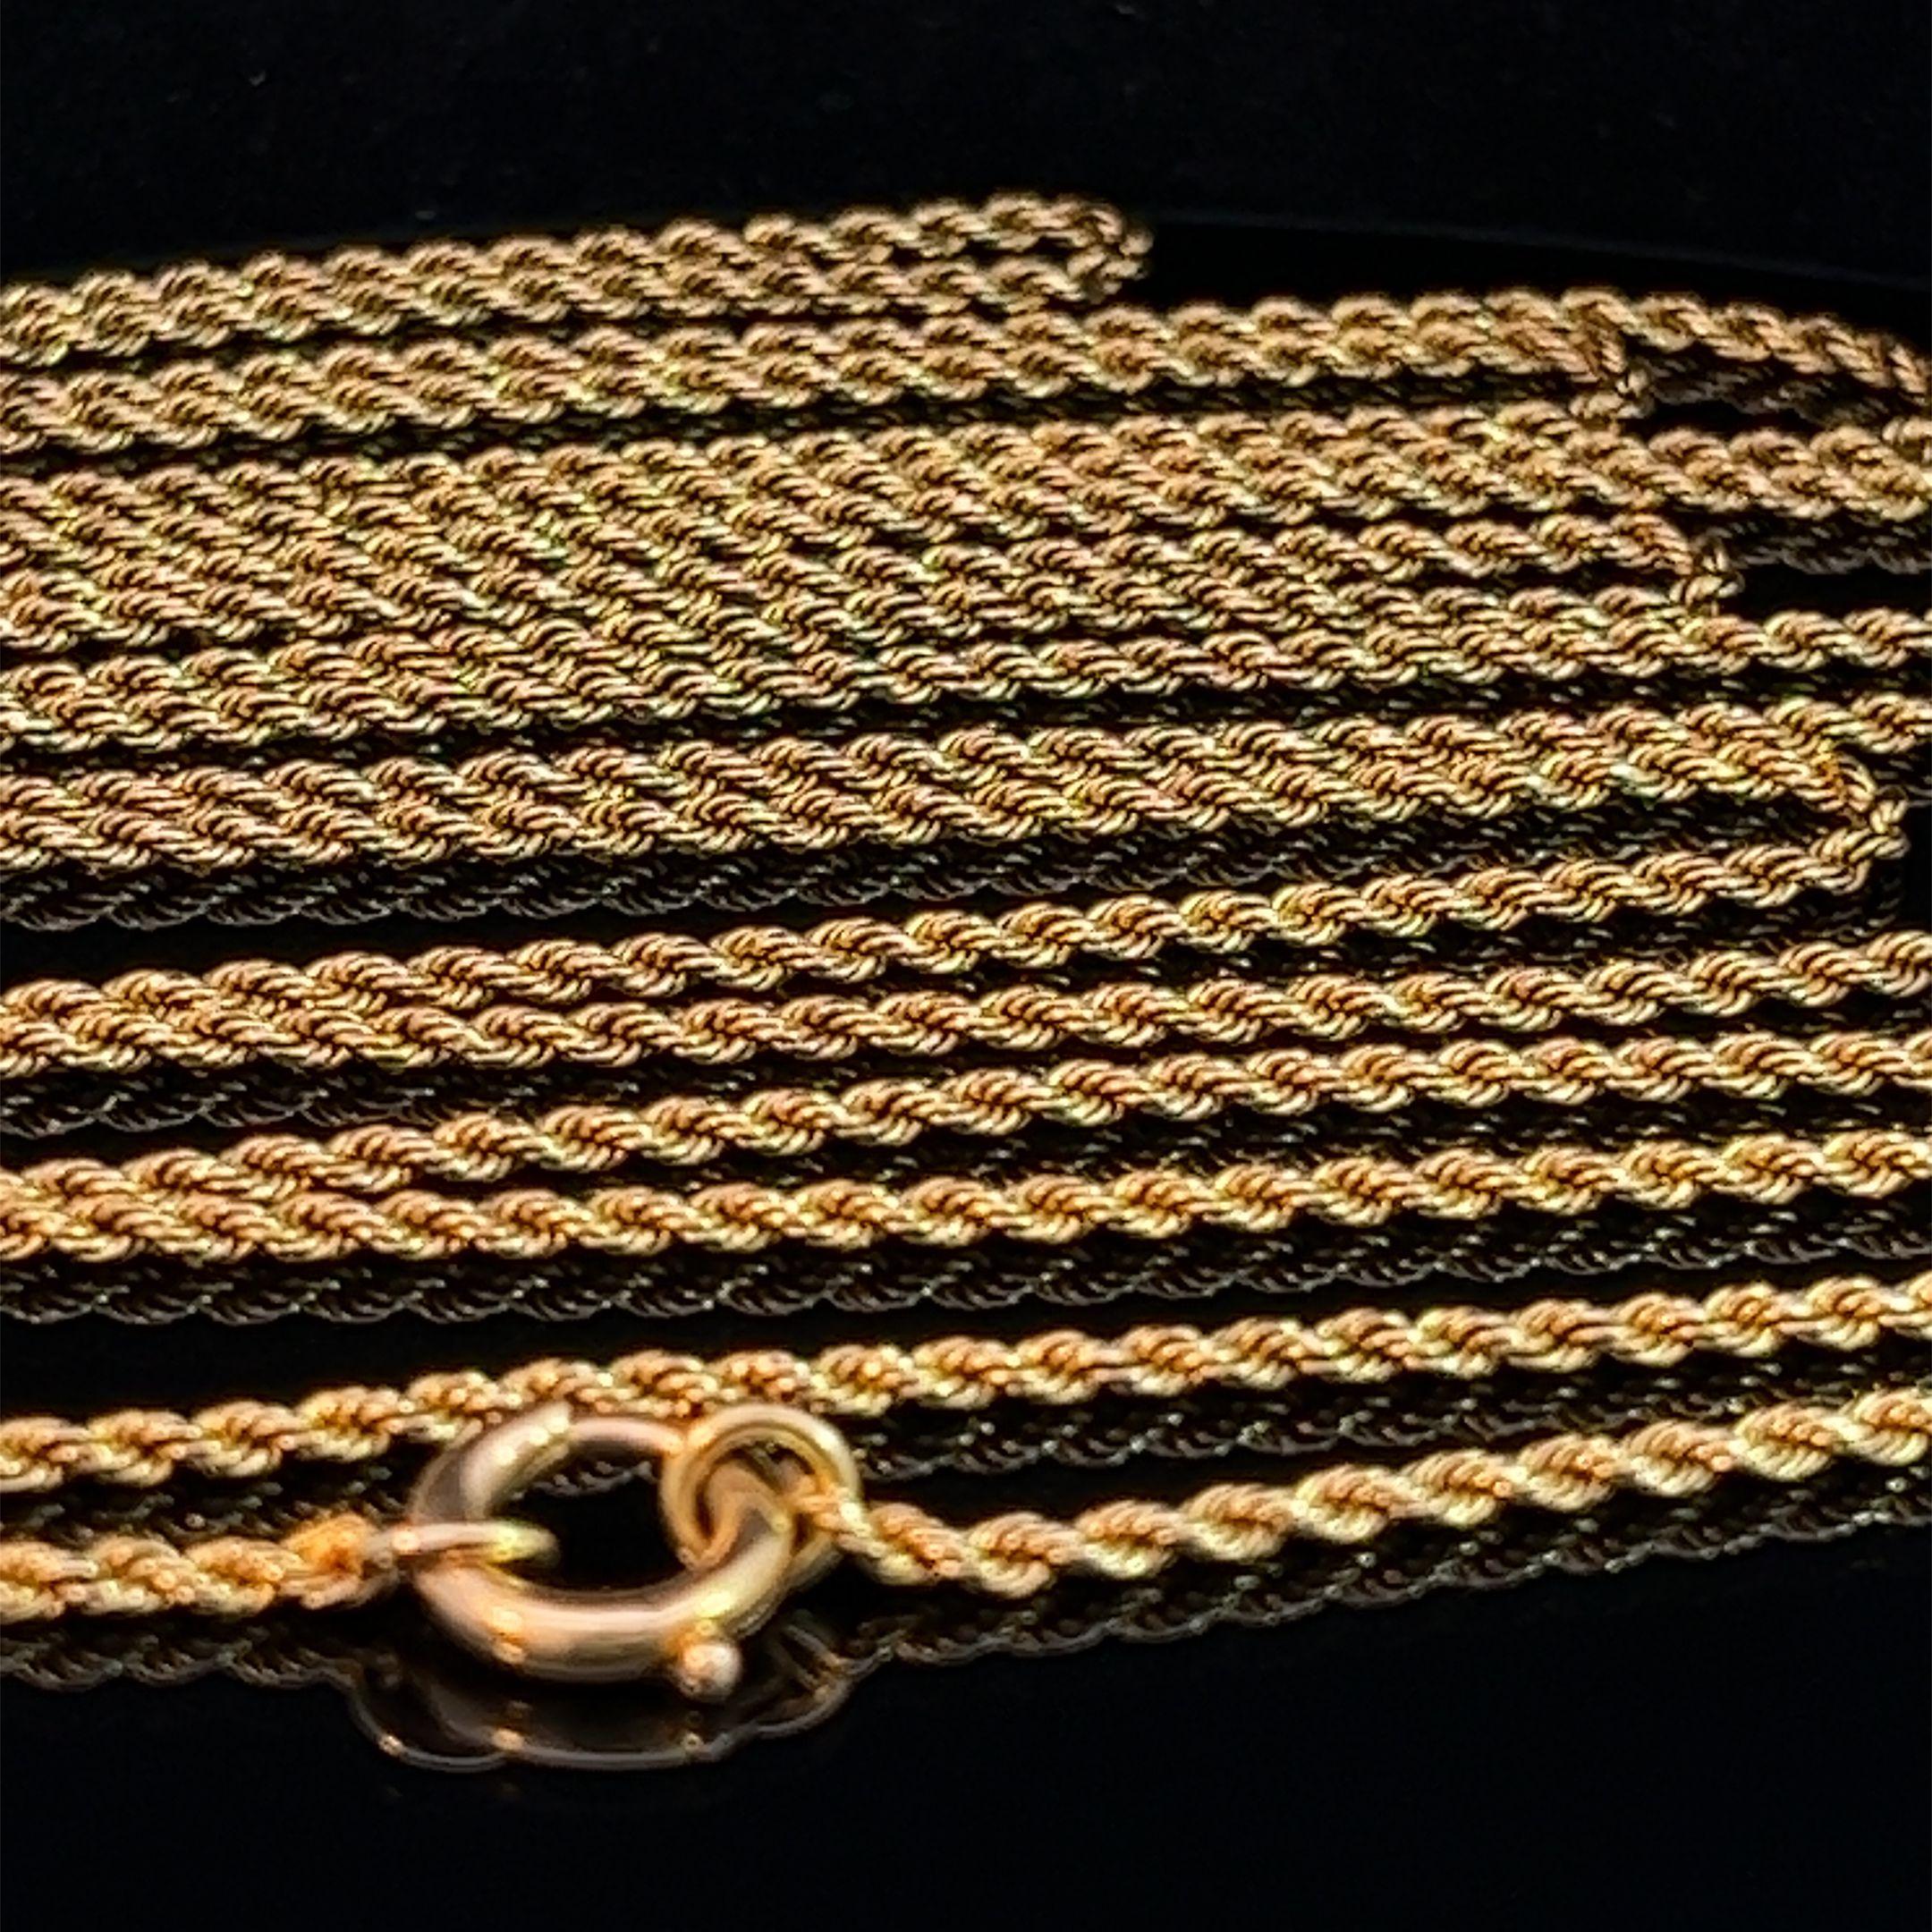 Antique 15k solid yellow gold long guard chain with an intricate twisted rope design. This exquisite chain measures 148cm in length and features a Victorian-style bolt-ring clasp. Its versatile length allows you to wear it as a full-length chain or